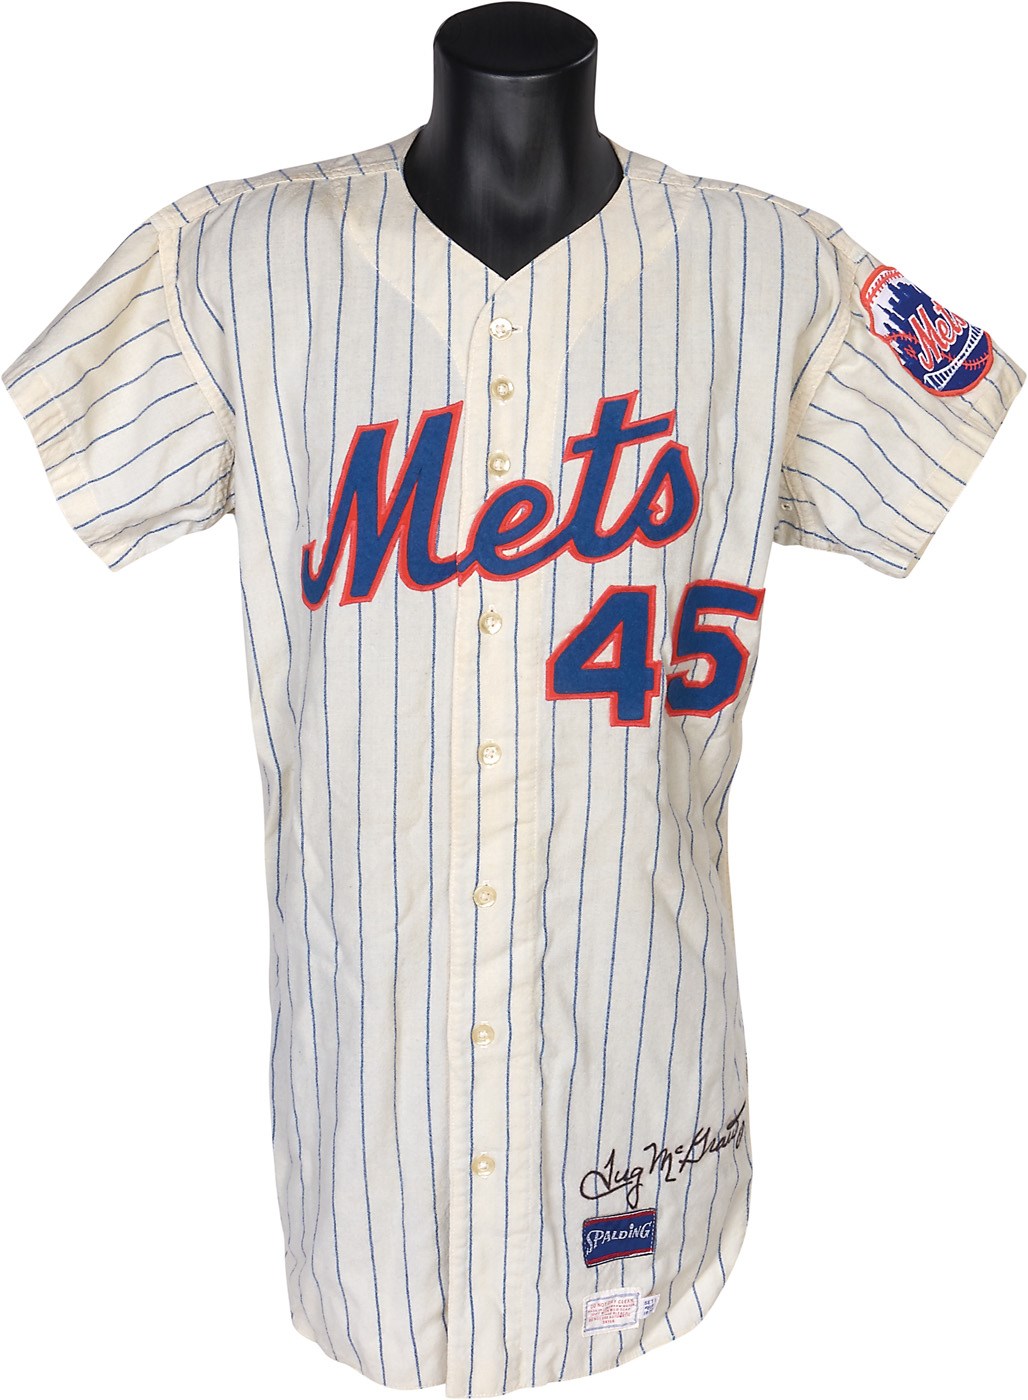 NY Yankees, Giants & Mets - 1970 Tug McGraw Signed Game Worn Mets Jersey (Photo-Matched)